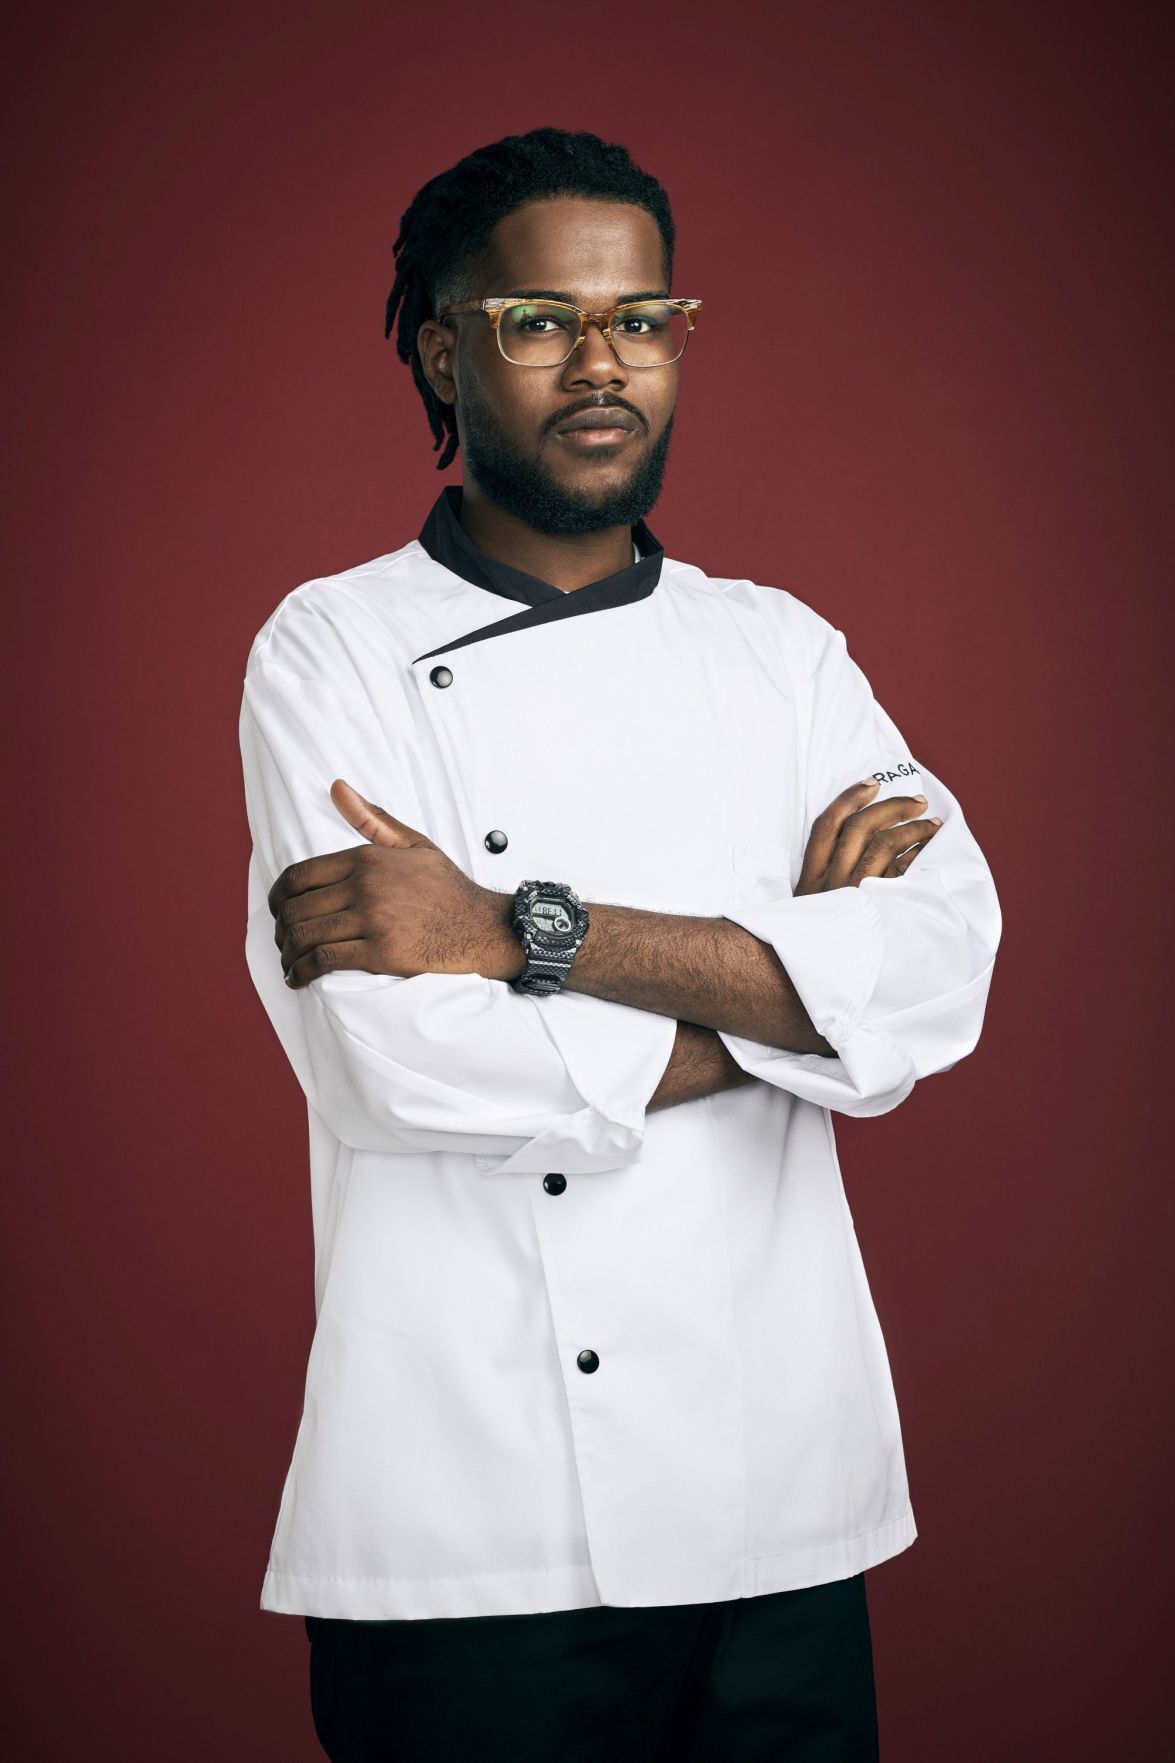 Chesterfield S Steve Glenn Jr Will Be On This Season S Hell S Kitchen With Gordon Ramsay Dining Richmond Com